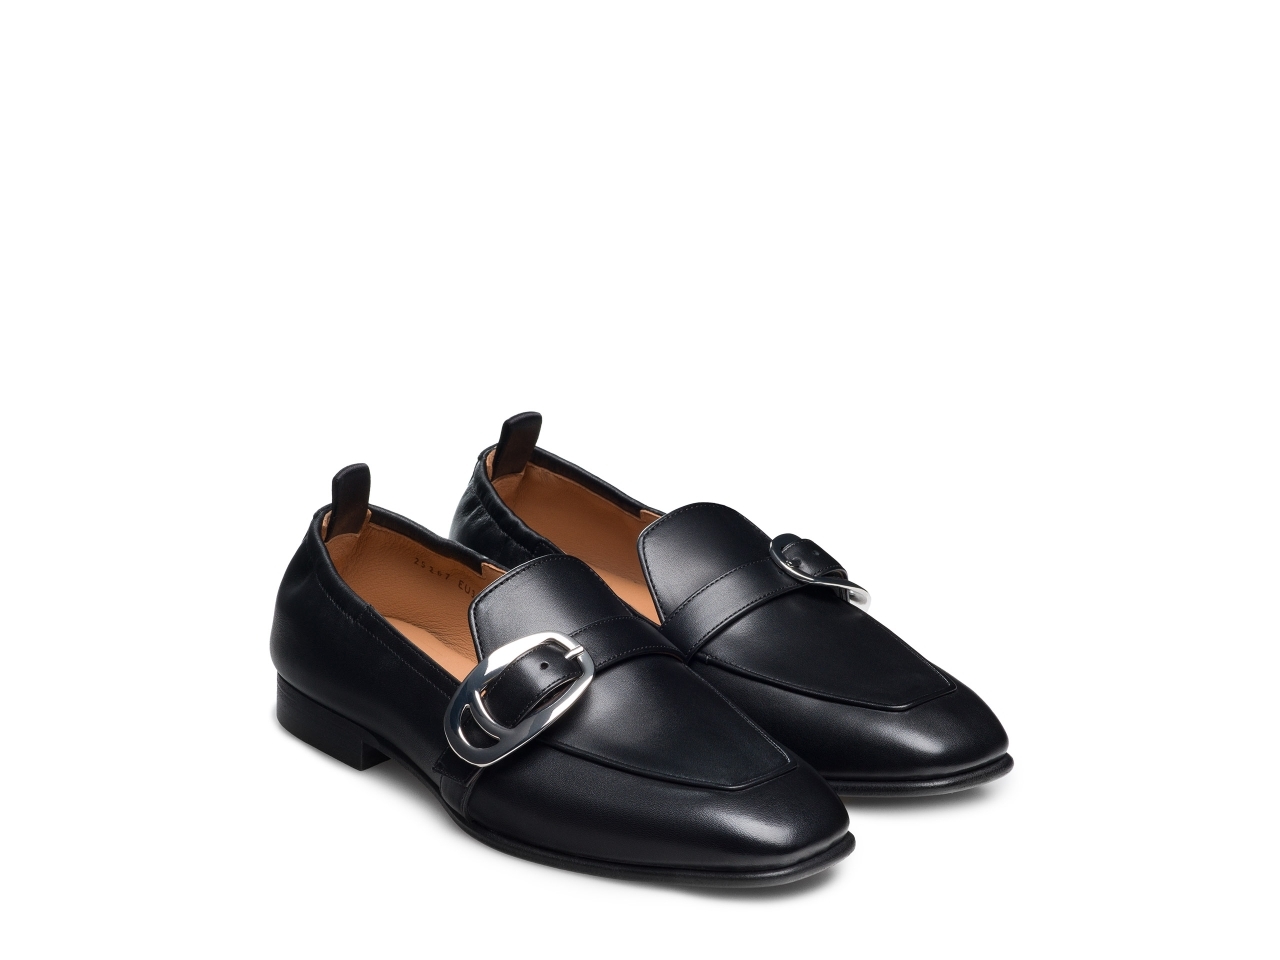 Pair of the Bella Moval Black